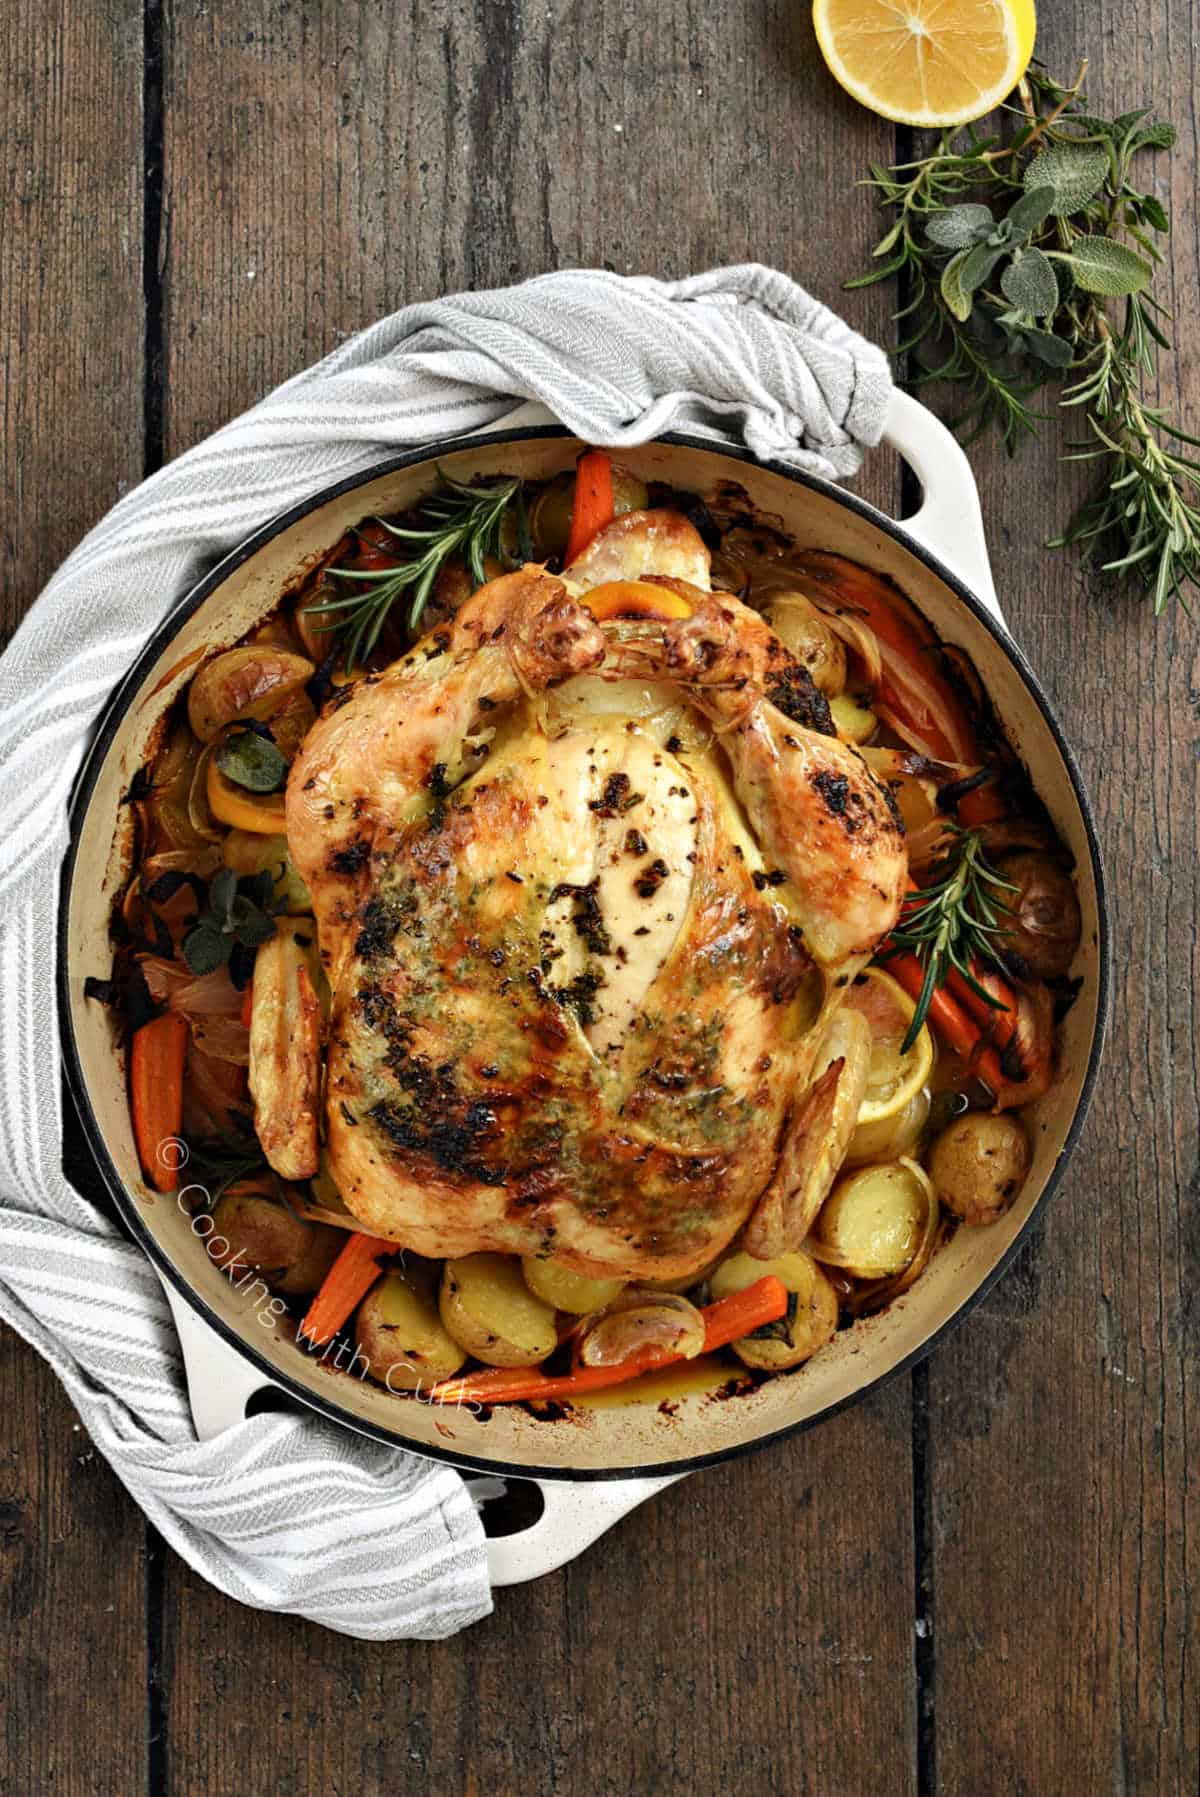 simple-roast-chicken-on-potatoes-and-carrots-in-a-cast-iron-skillet.